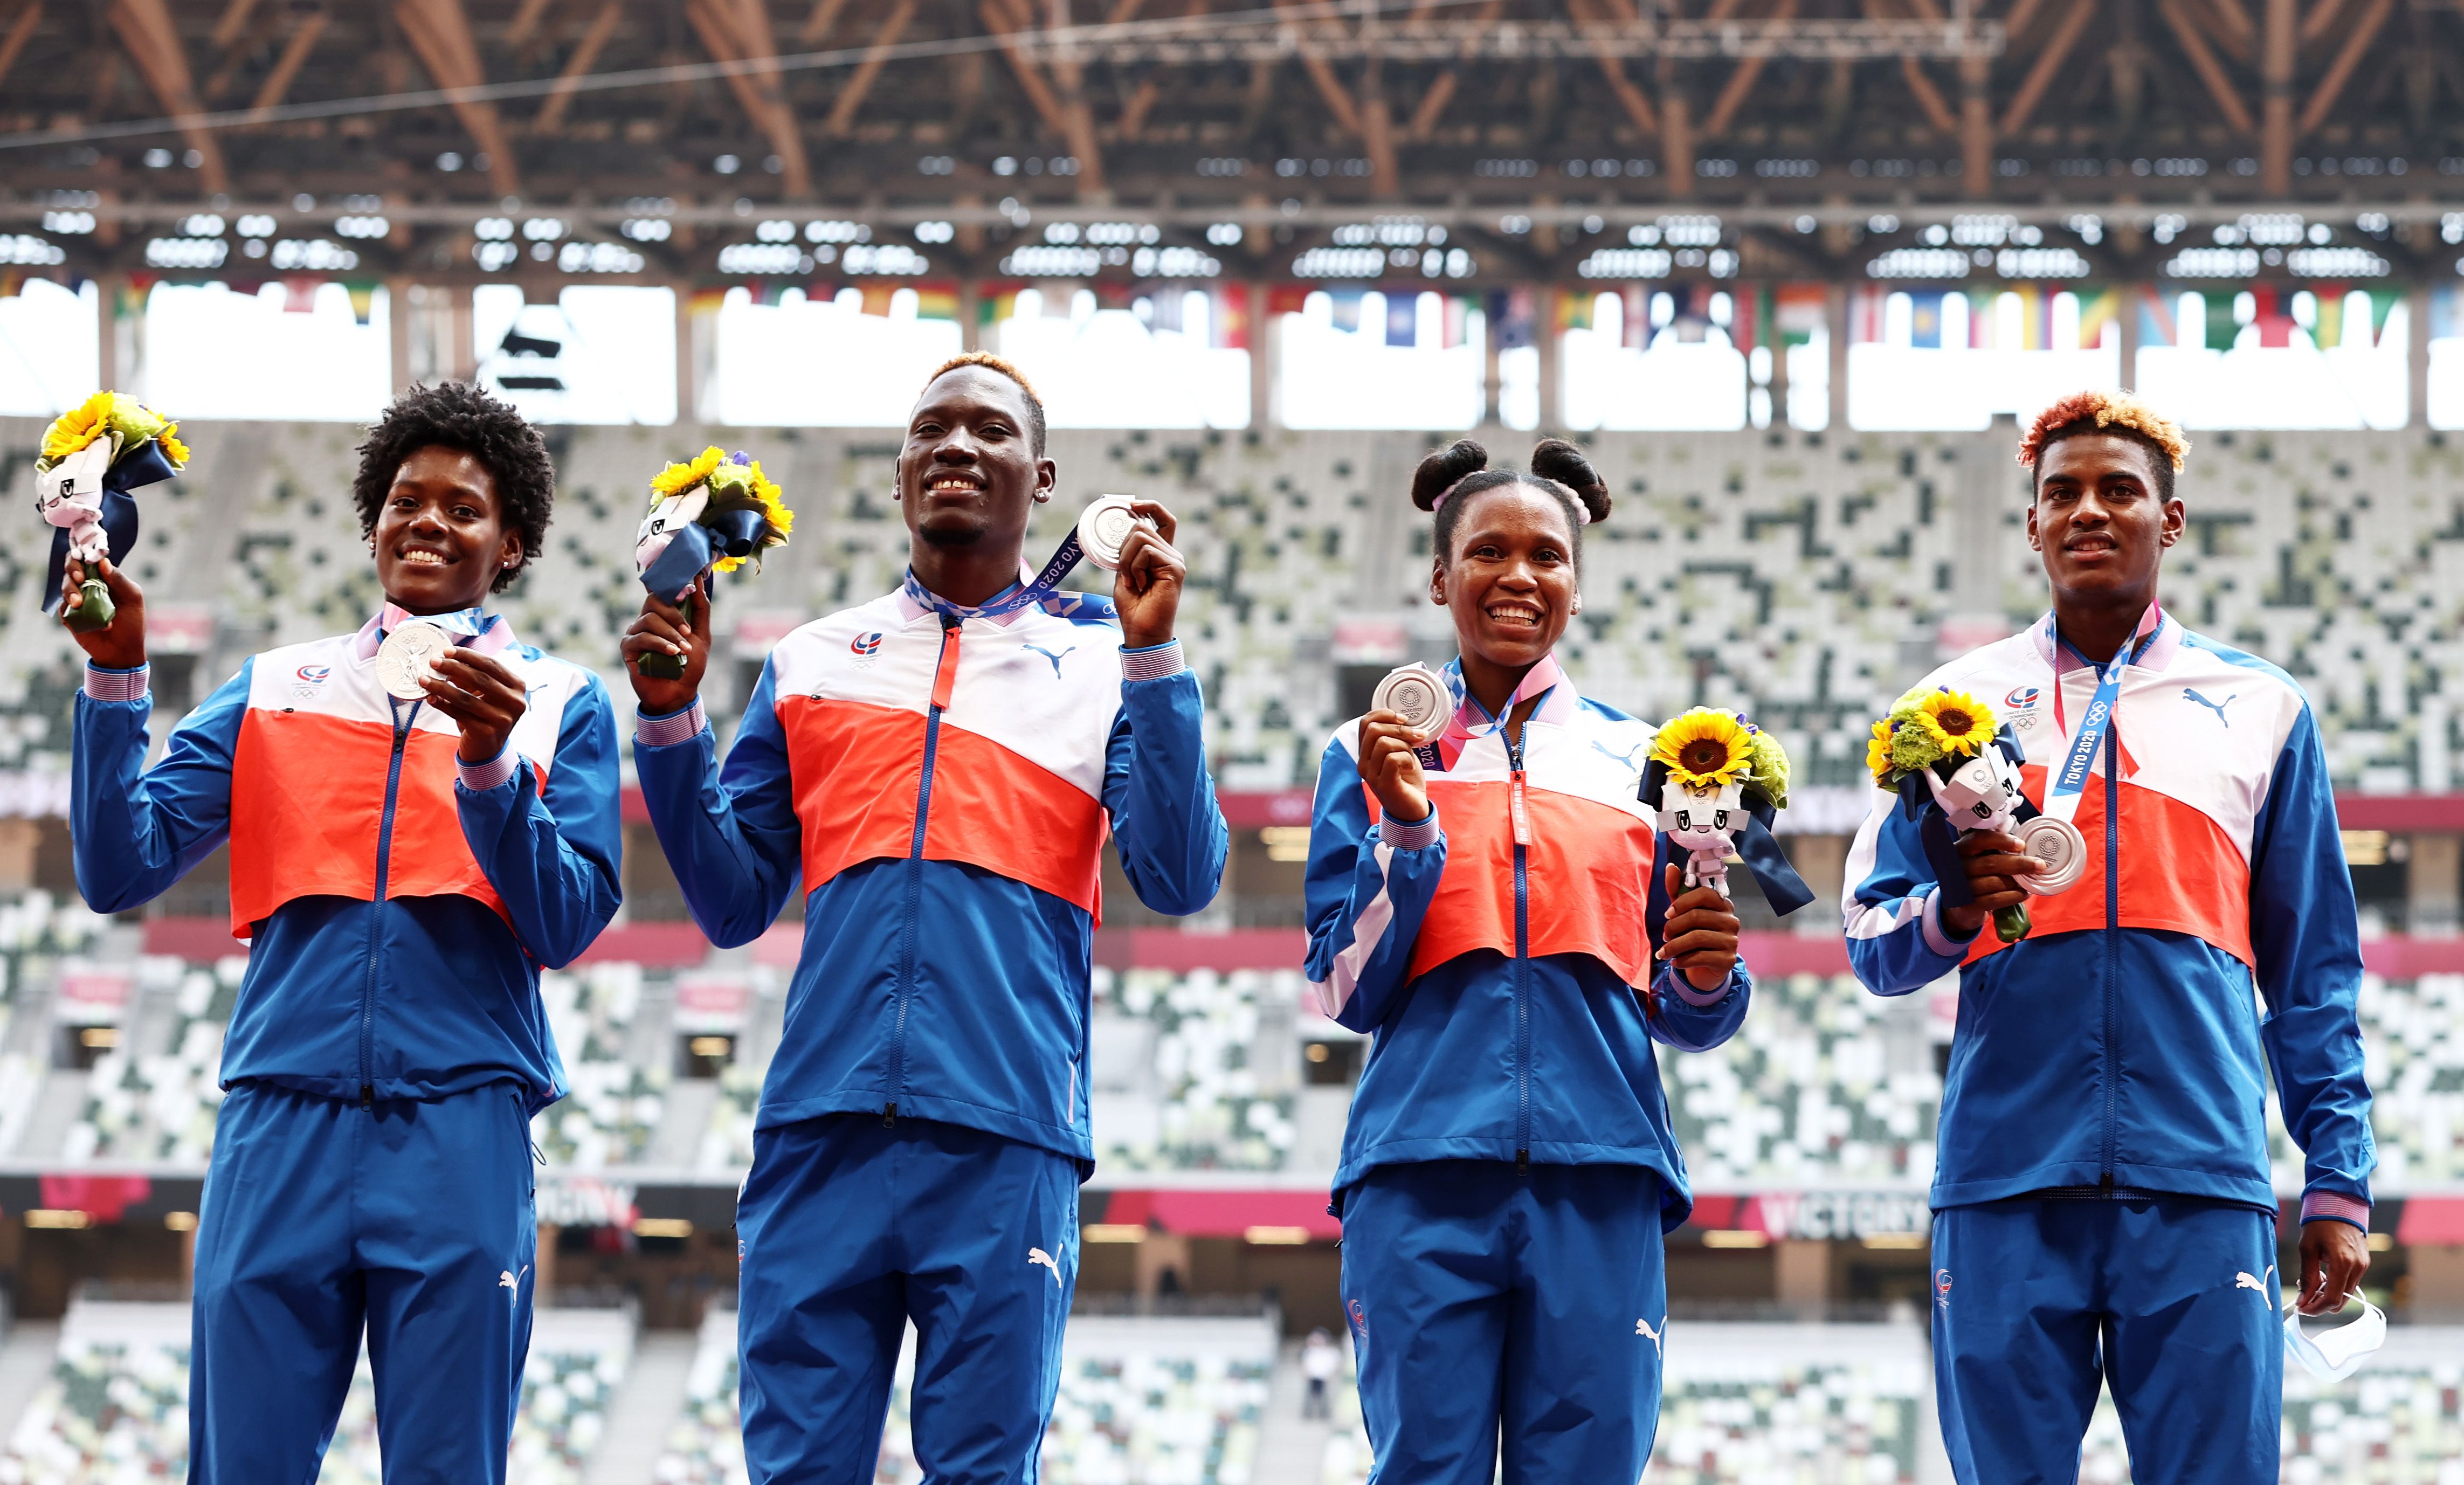 The Dominican Republic mixed relay team with their Olympic silver medals in Tokyo